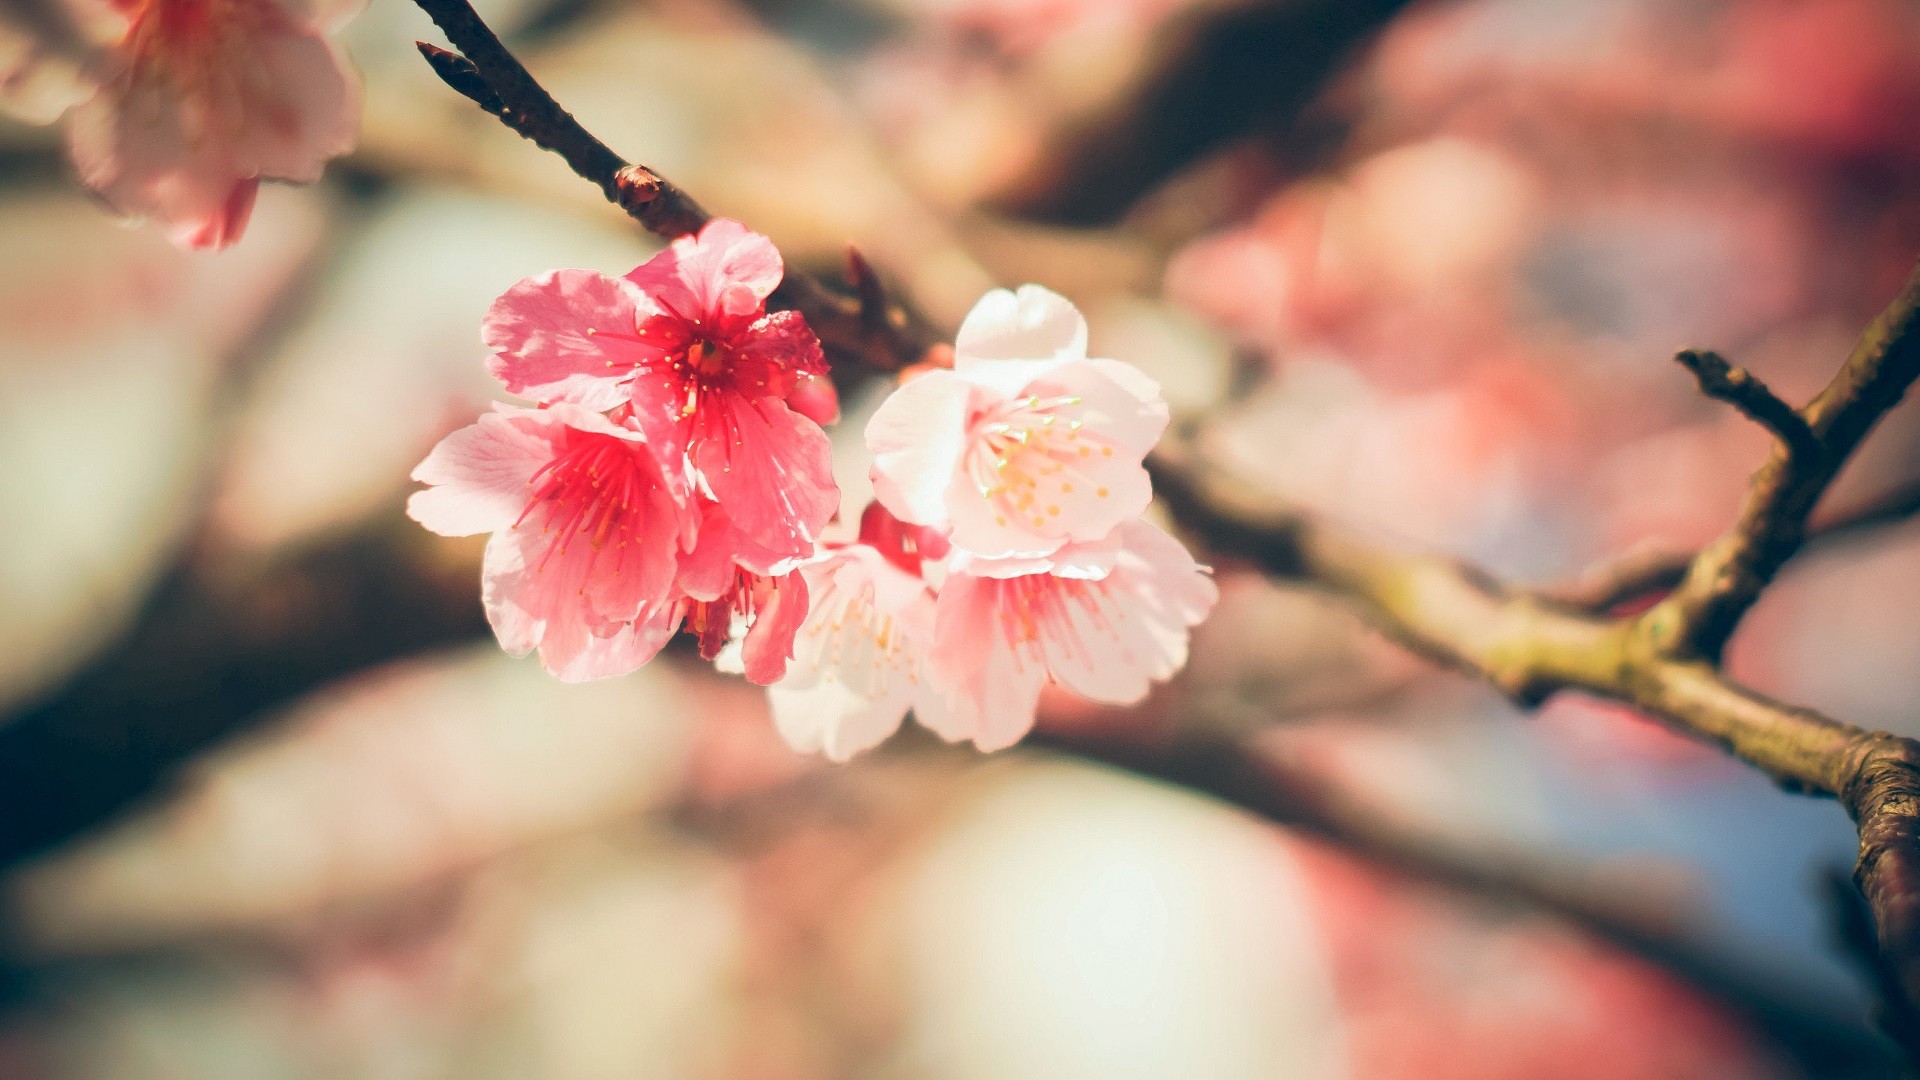 General 1920x1080 nature flowers blossoms cherry blossom closeup depth of field plants